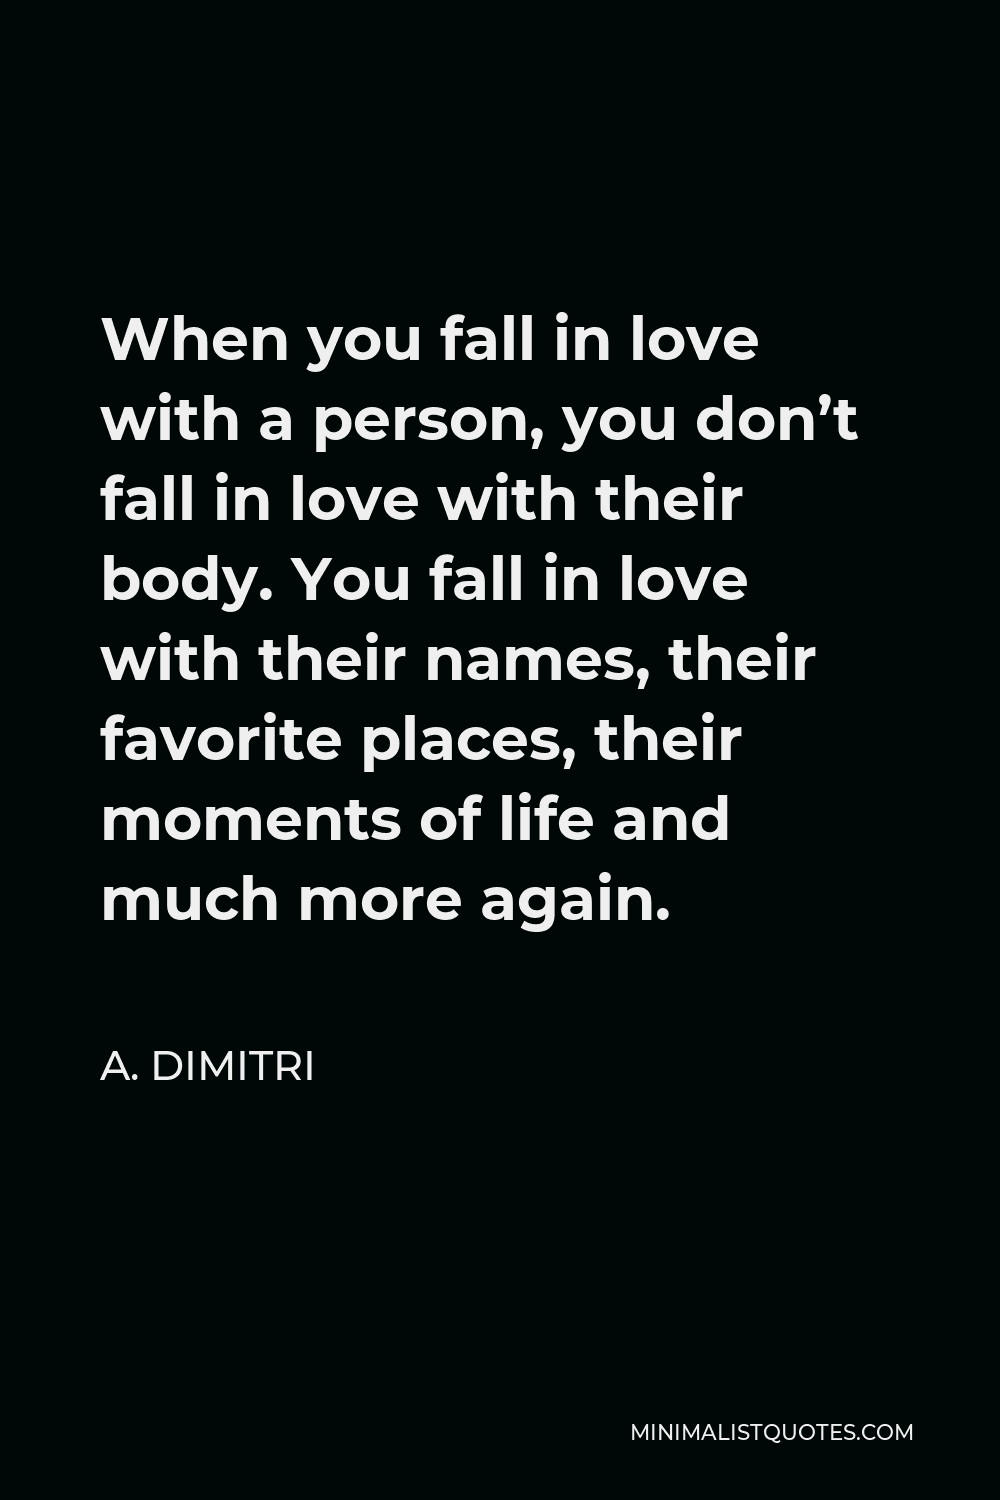 A. Dimitri Quote - When you fall in love with a person, you don’t fall in love with their body. You fall in love with their names, their favorite places, their moments of life and much more again.